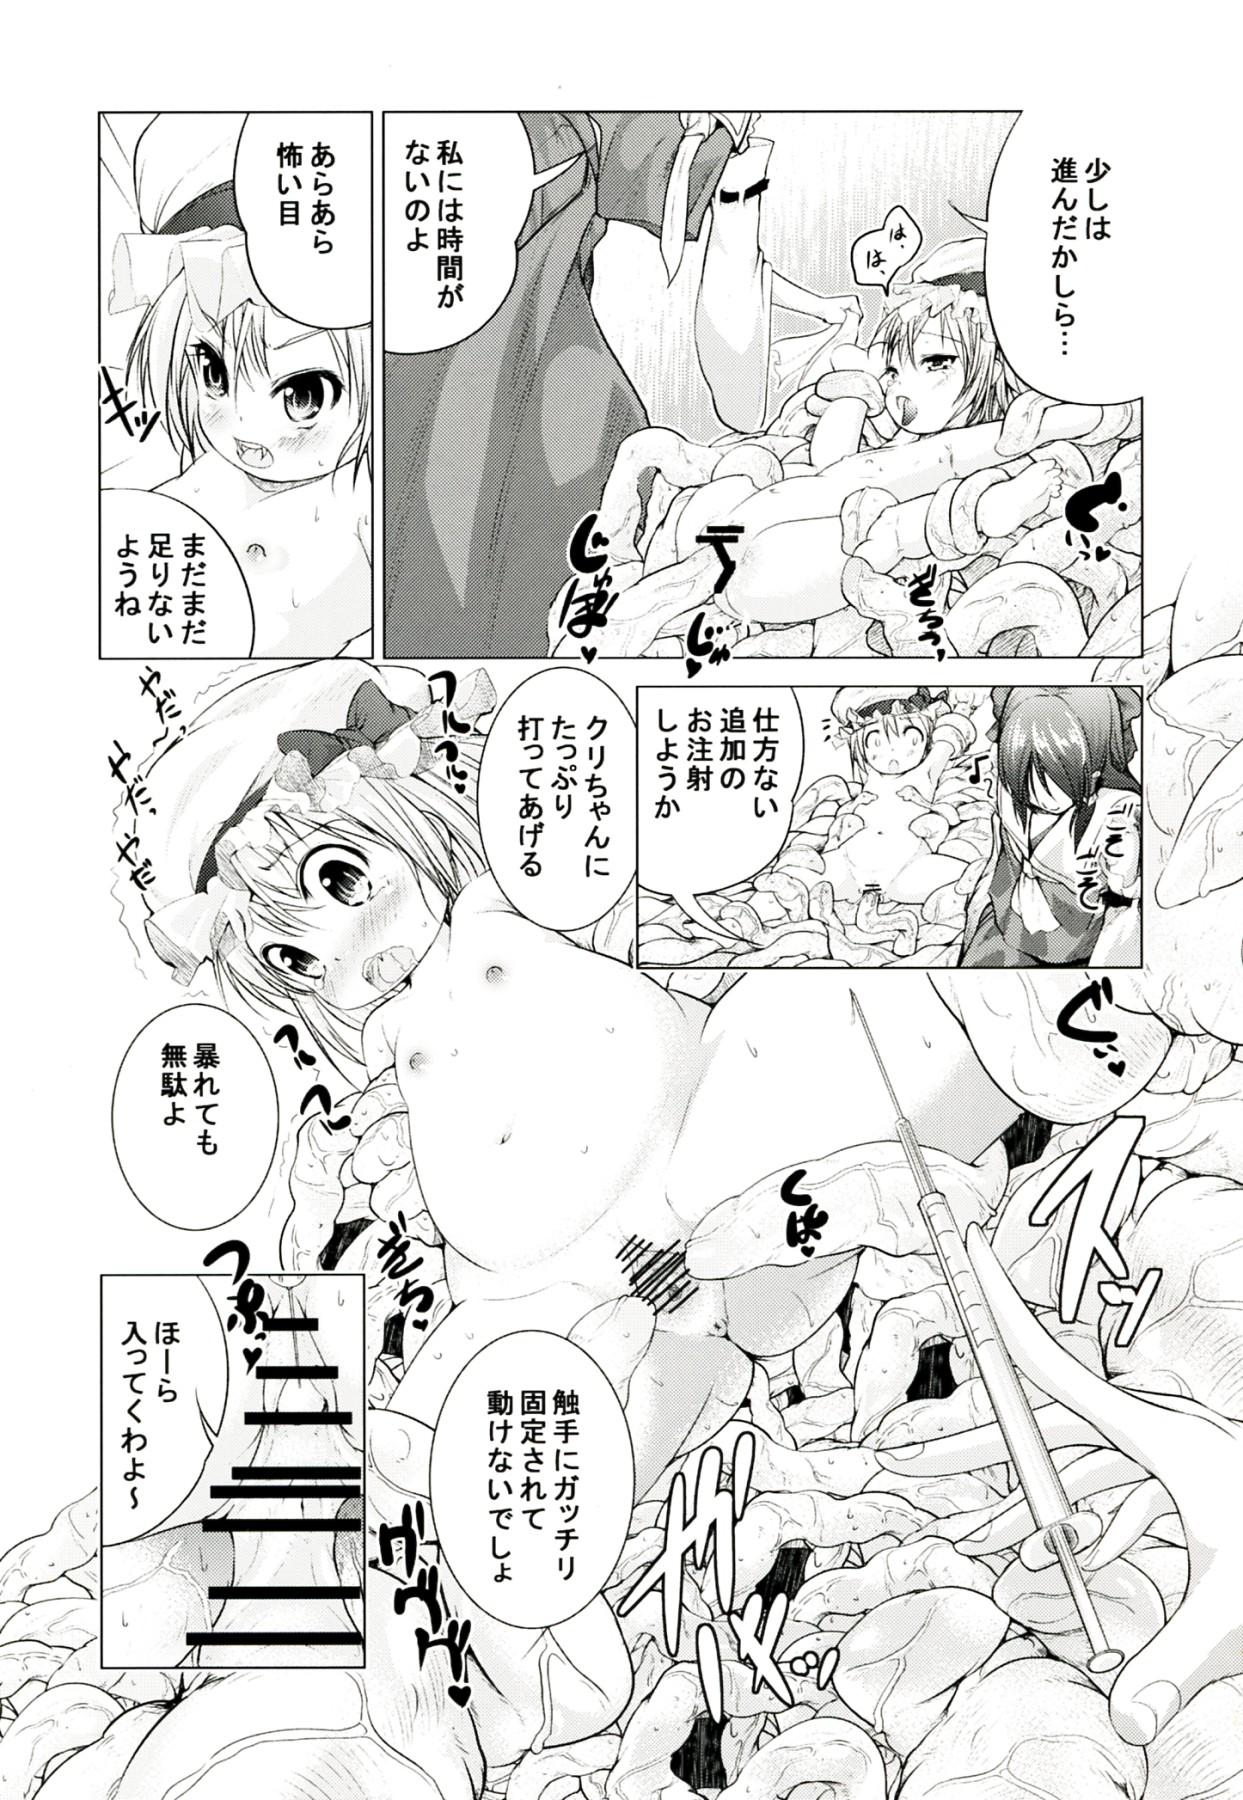 18 Year Old Porn Touhou no hon 2 - Touhou project Porno Amateur - Page 11